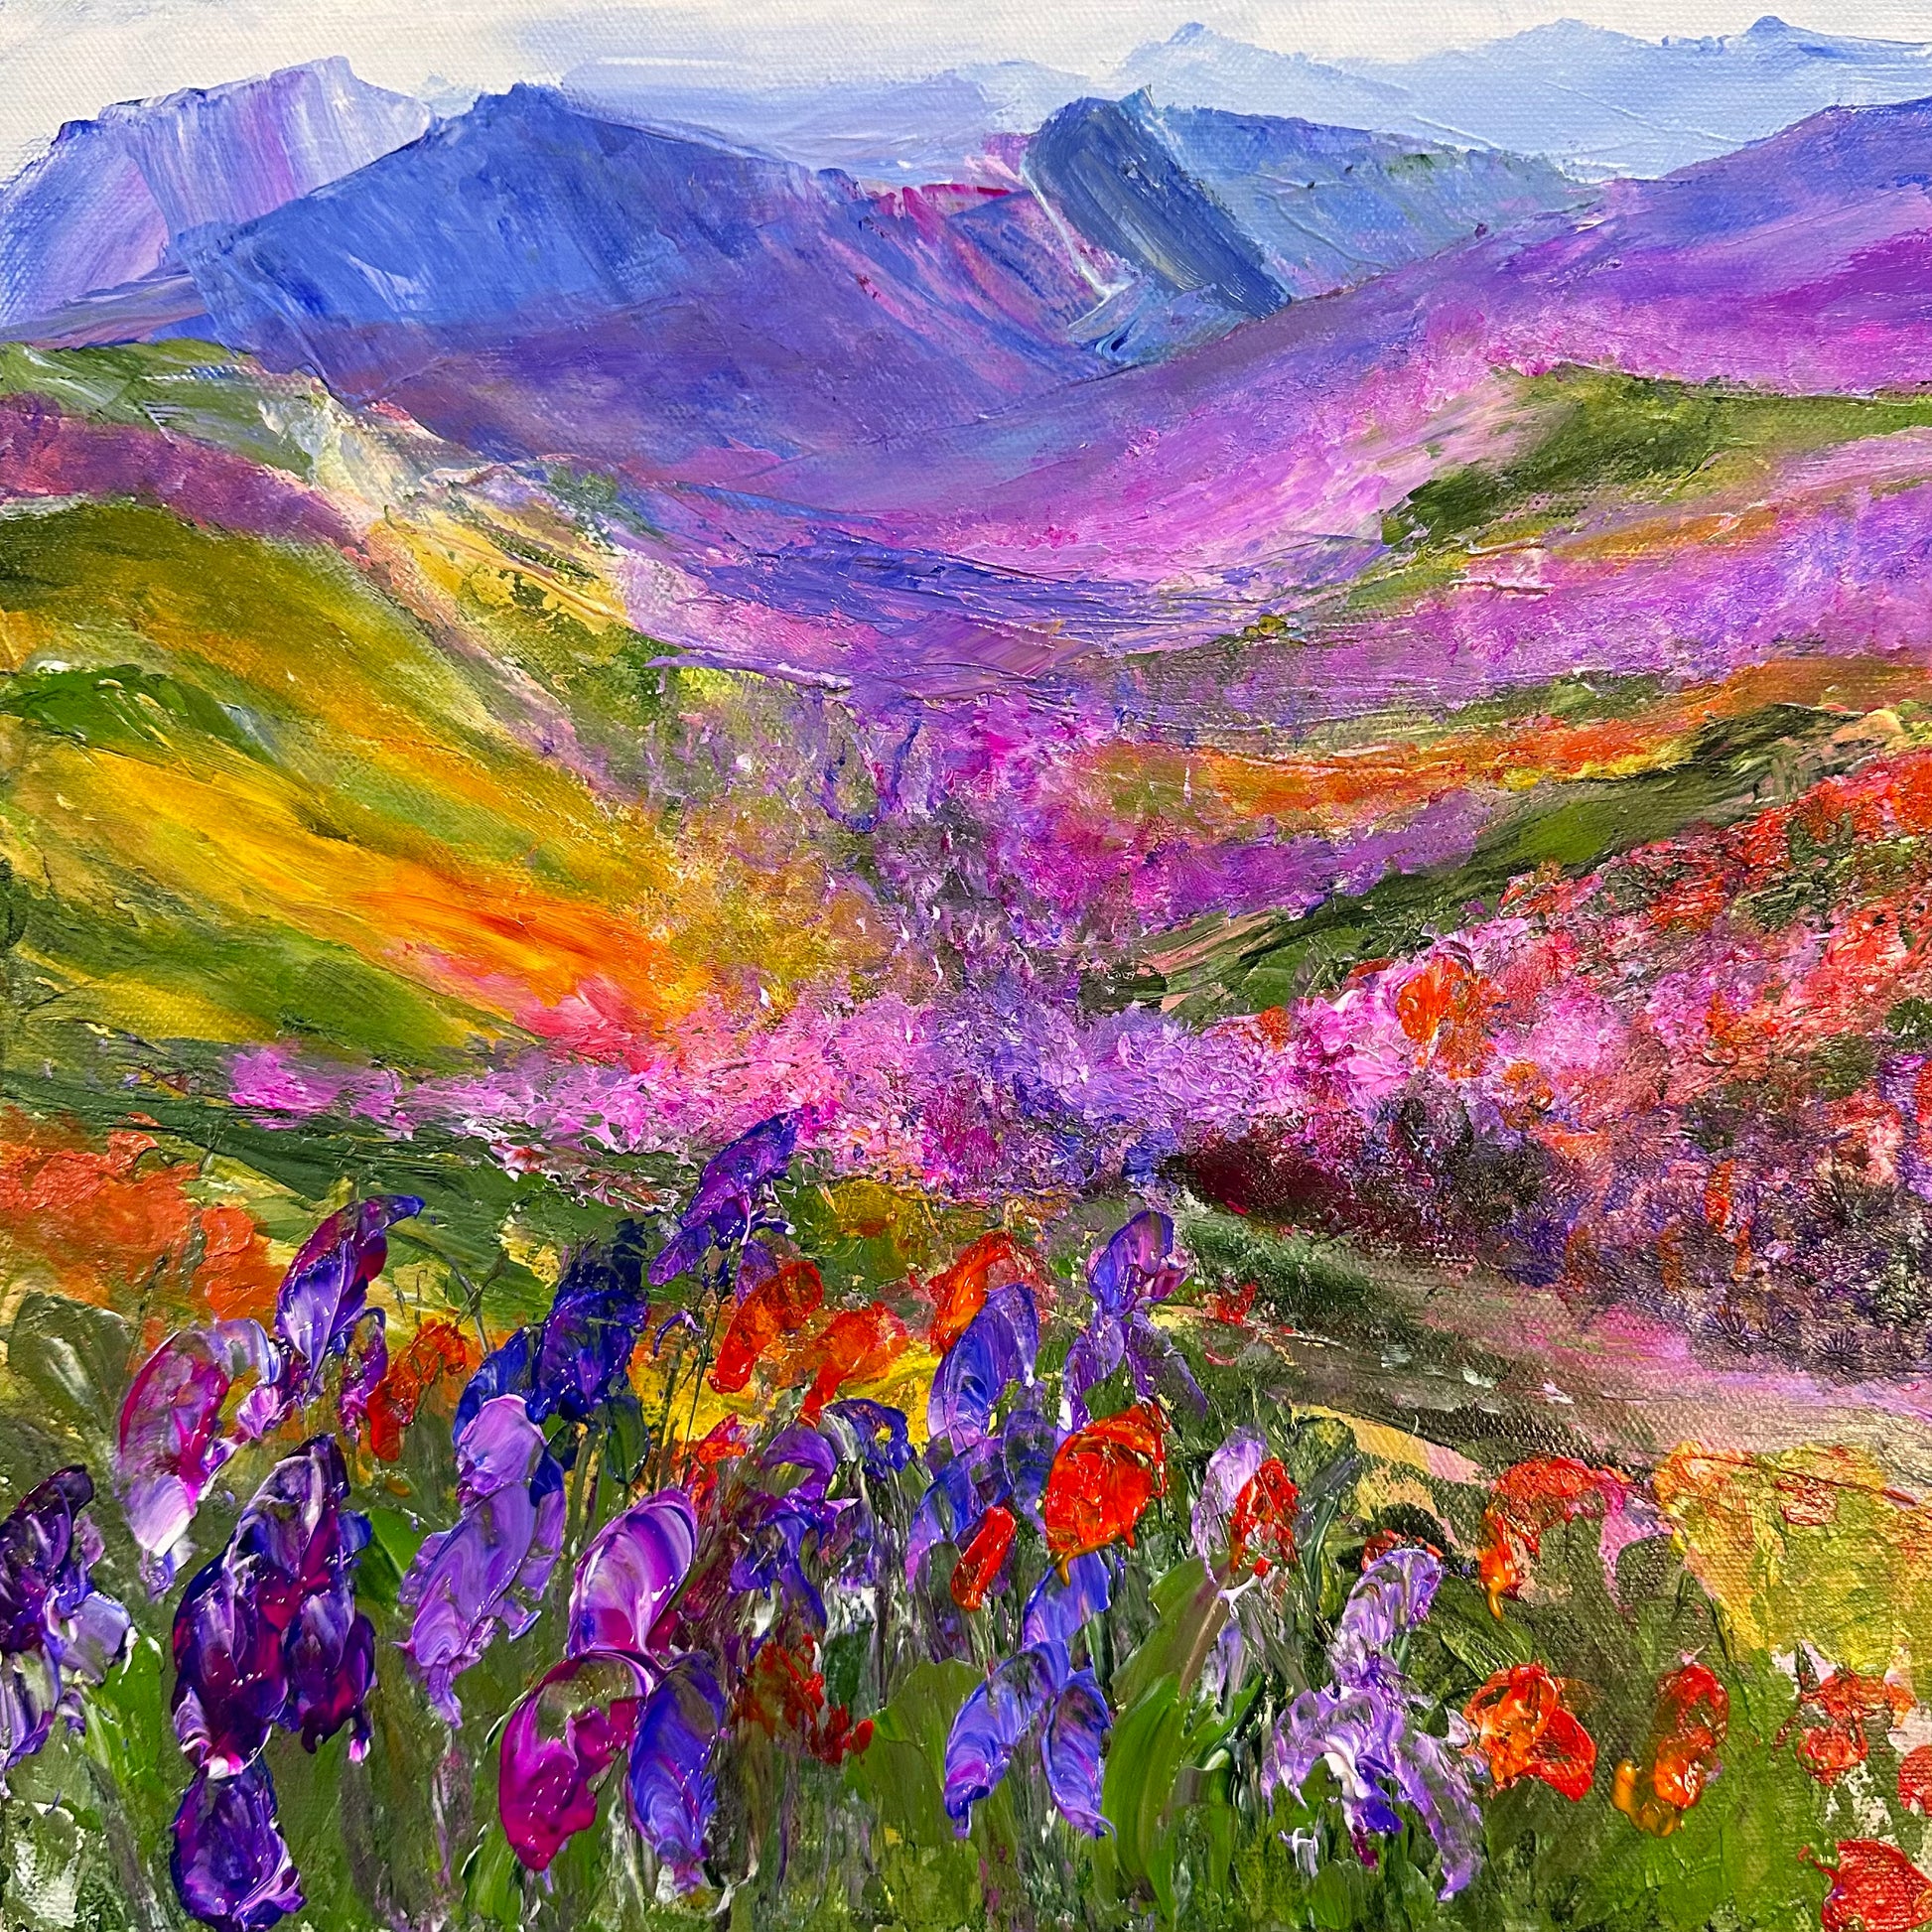 Abstract impressionist acrylic painting of a purple mountain range with wild flowers.